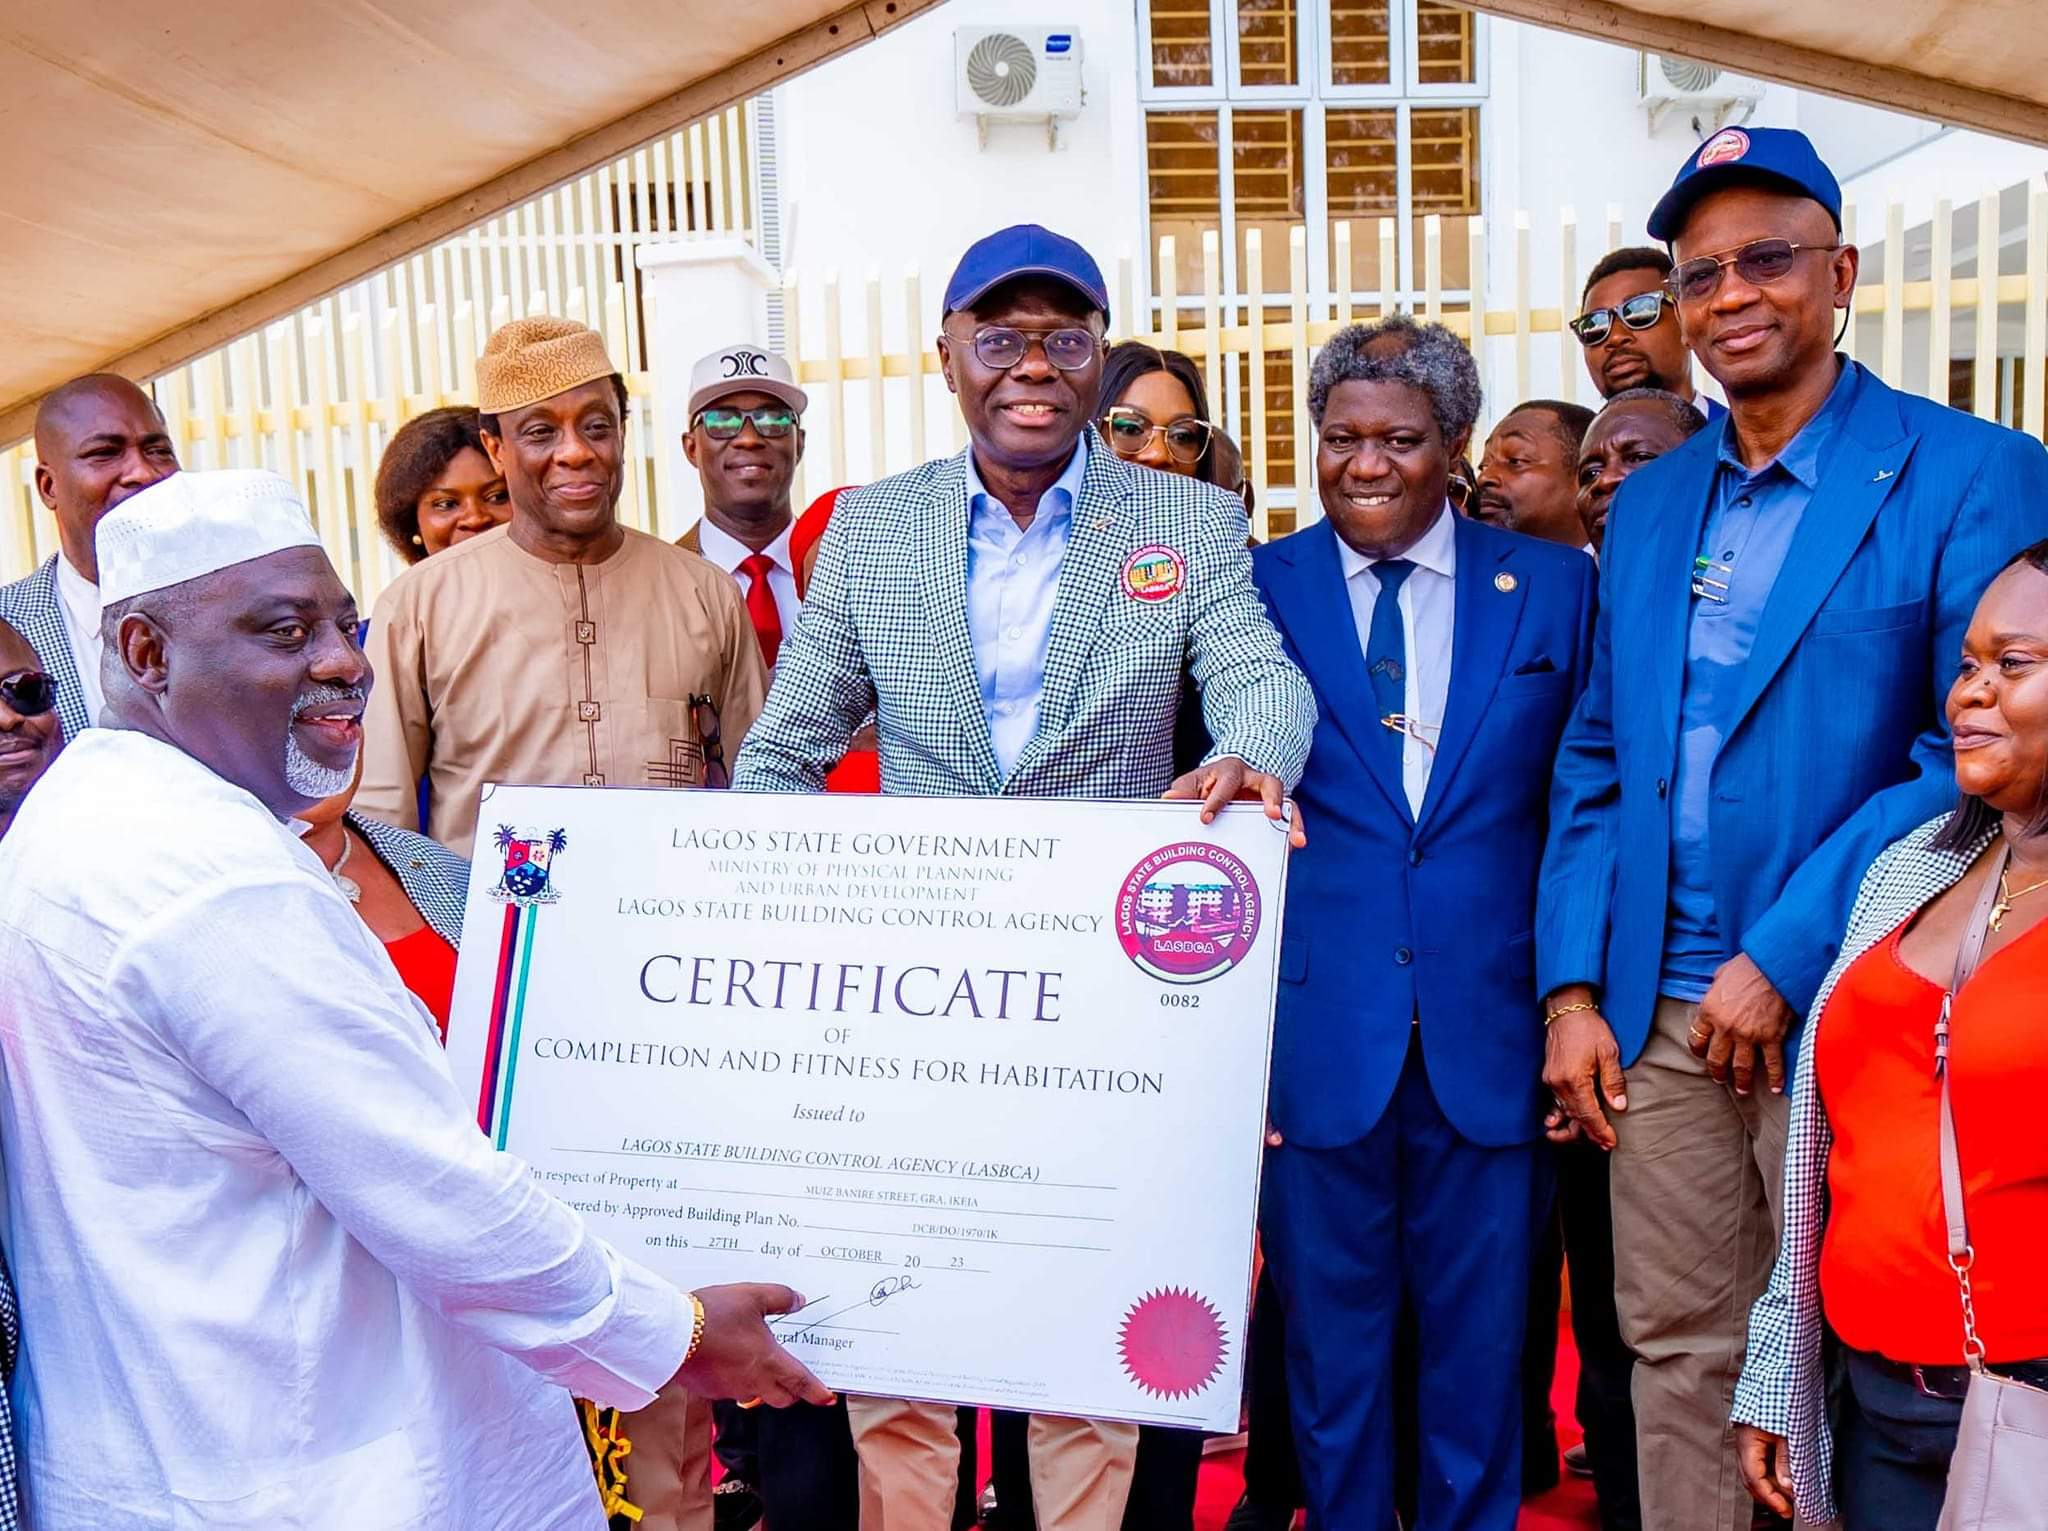 Lagos State Governor, Babajide Sanwo-Olu, presenting the Certificate of Completion and Fitness for Habitation to the LASBCA General Manager, Gbolahan Oki, at the new LASBCA headquarters